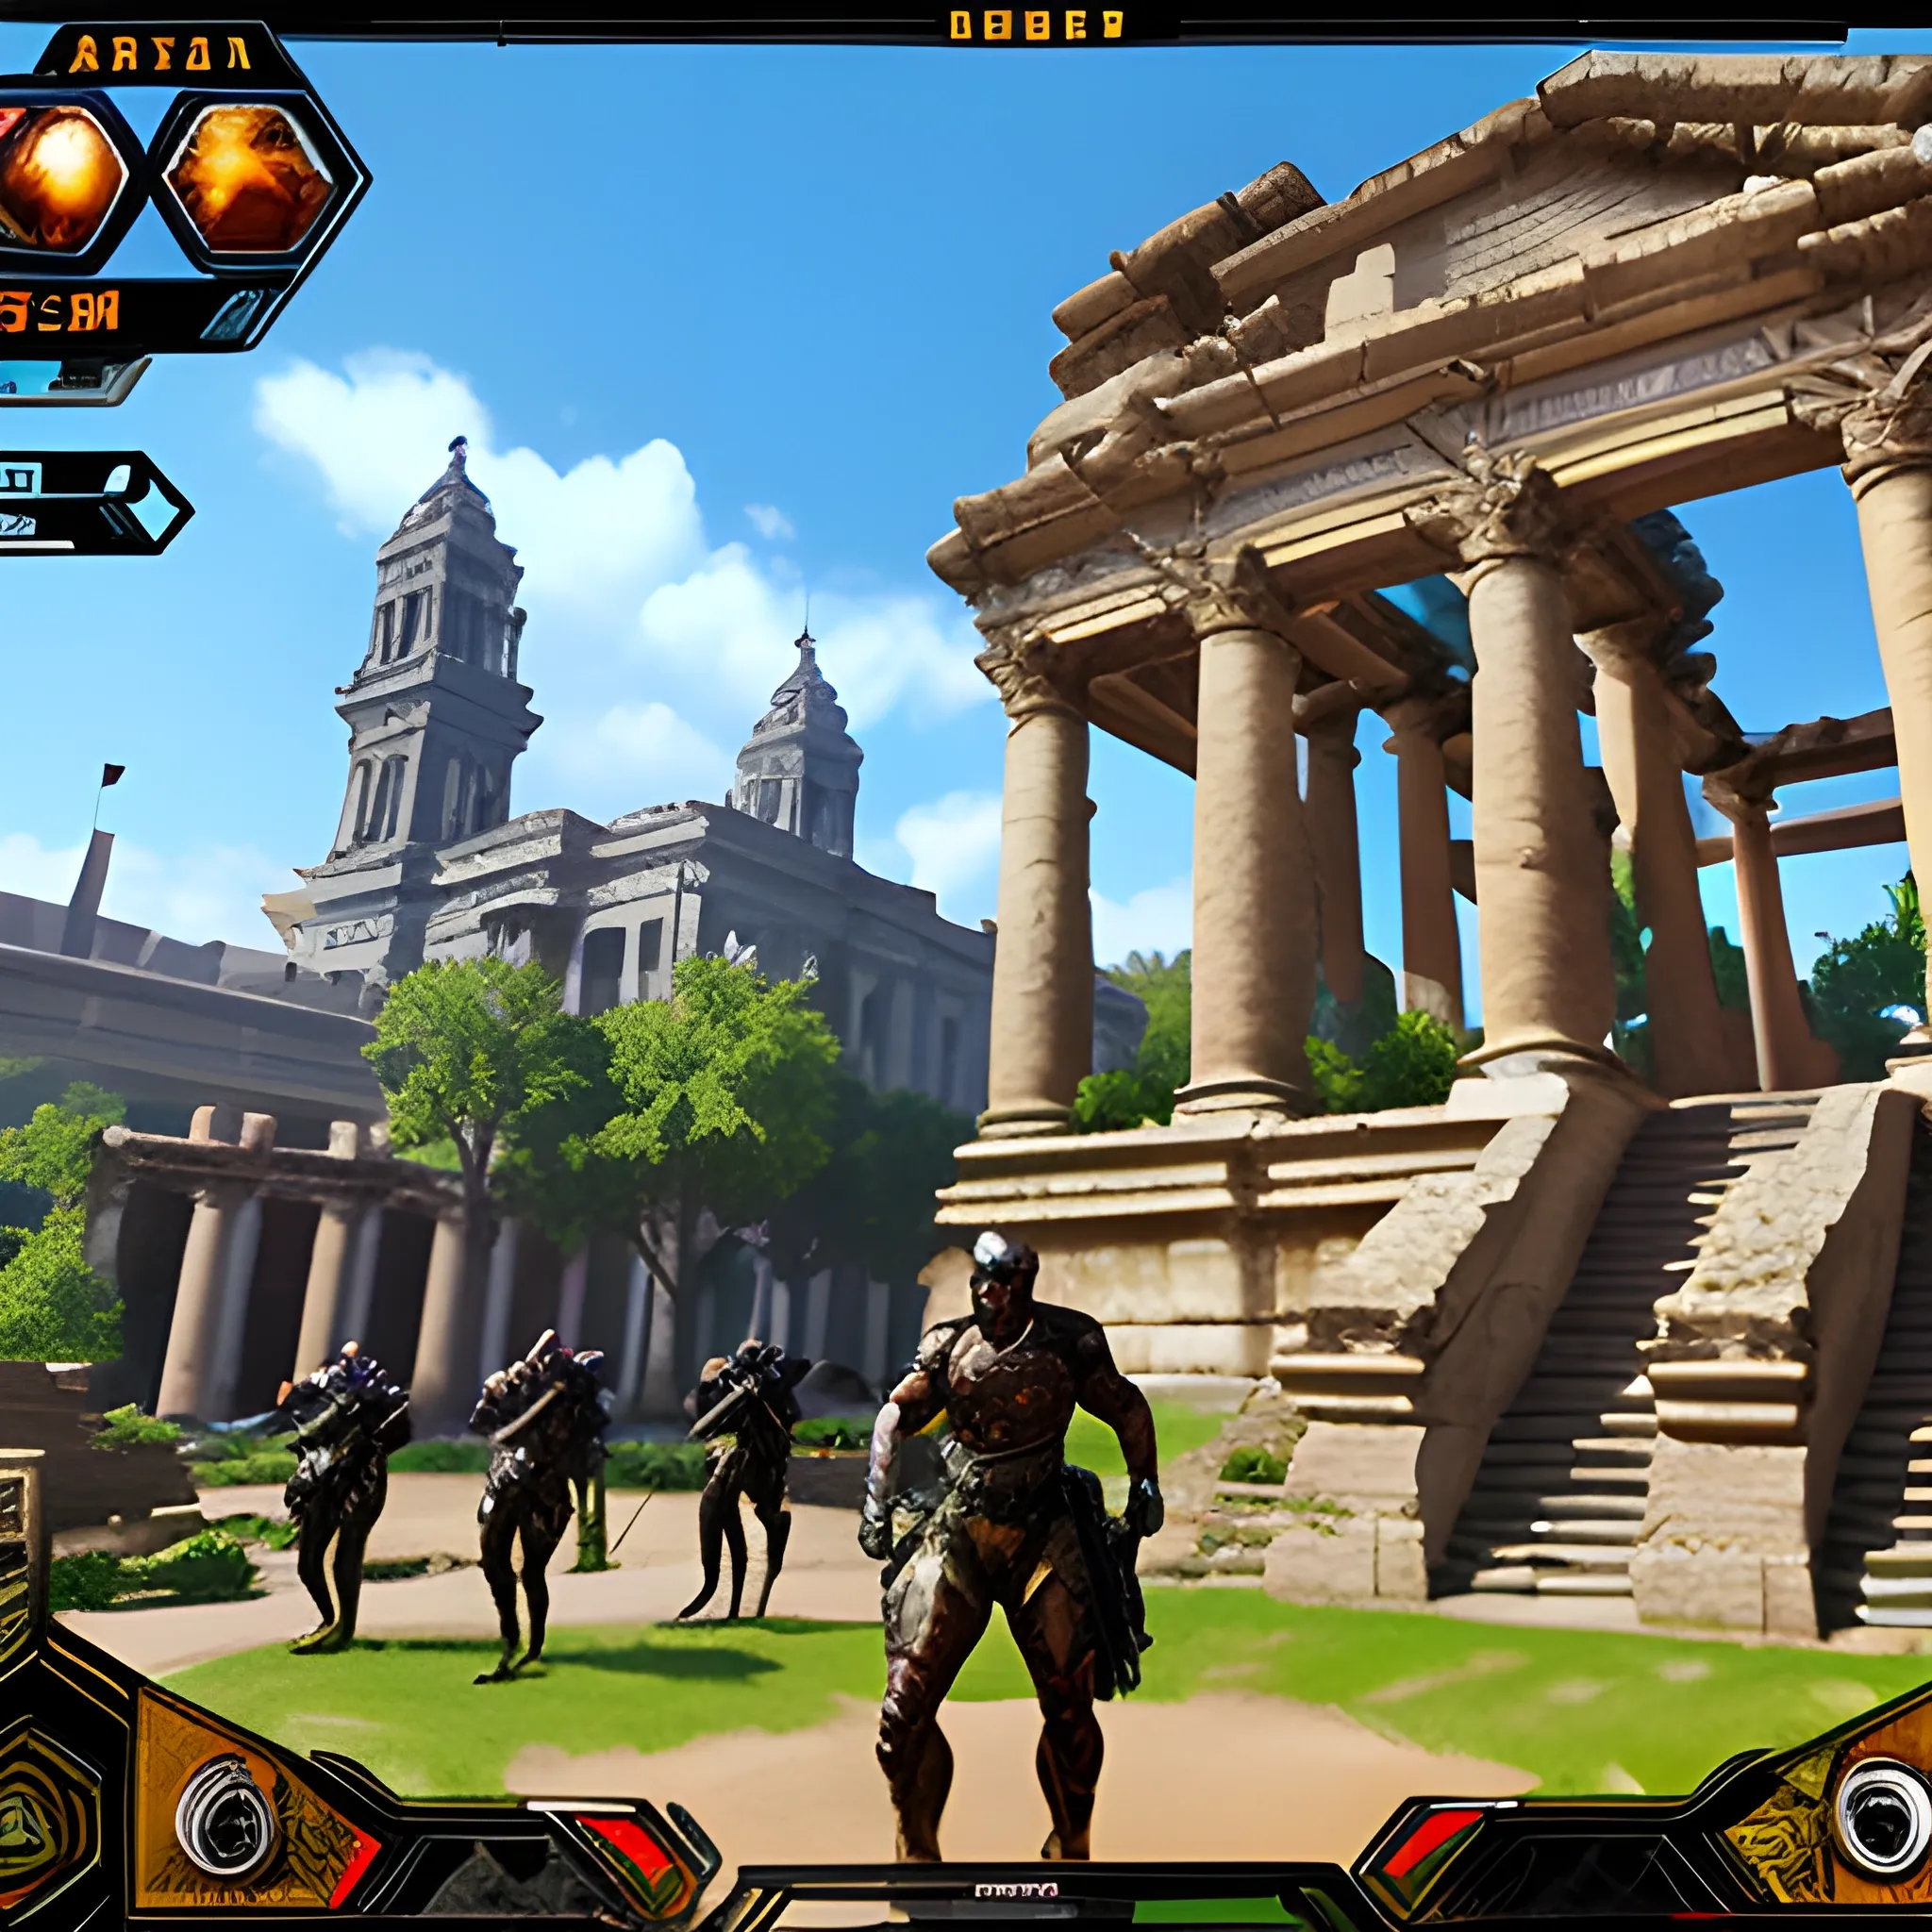 videogame screenshot with huge spangly sparkly assault rifle with gunsight in foreground, with young mothers walkig babies, in a municipal gardens, in the ancient world, very detailed